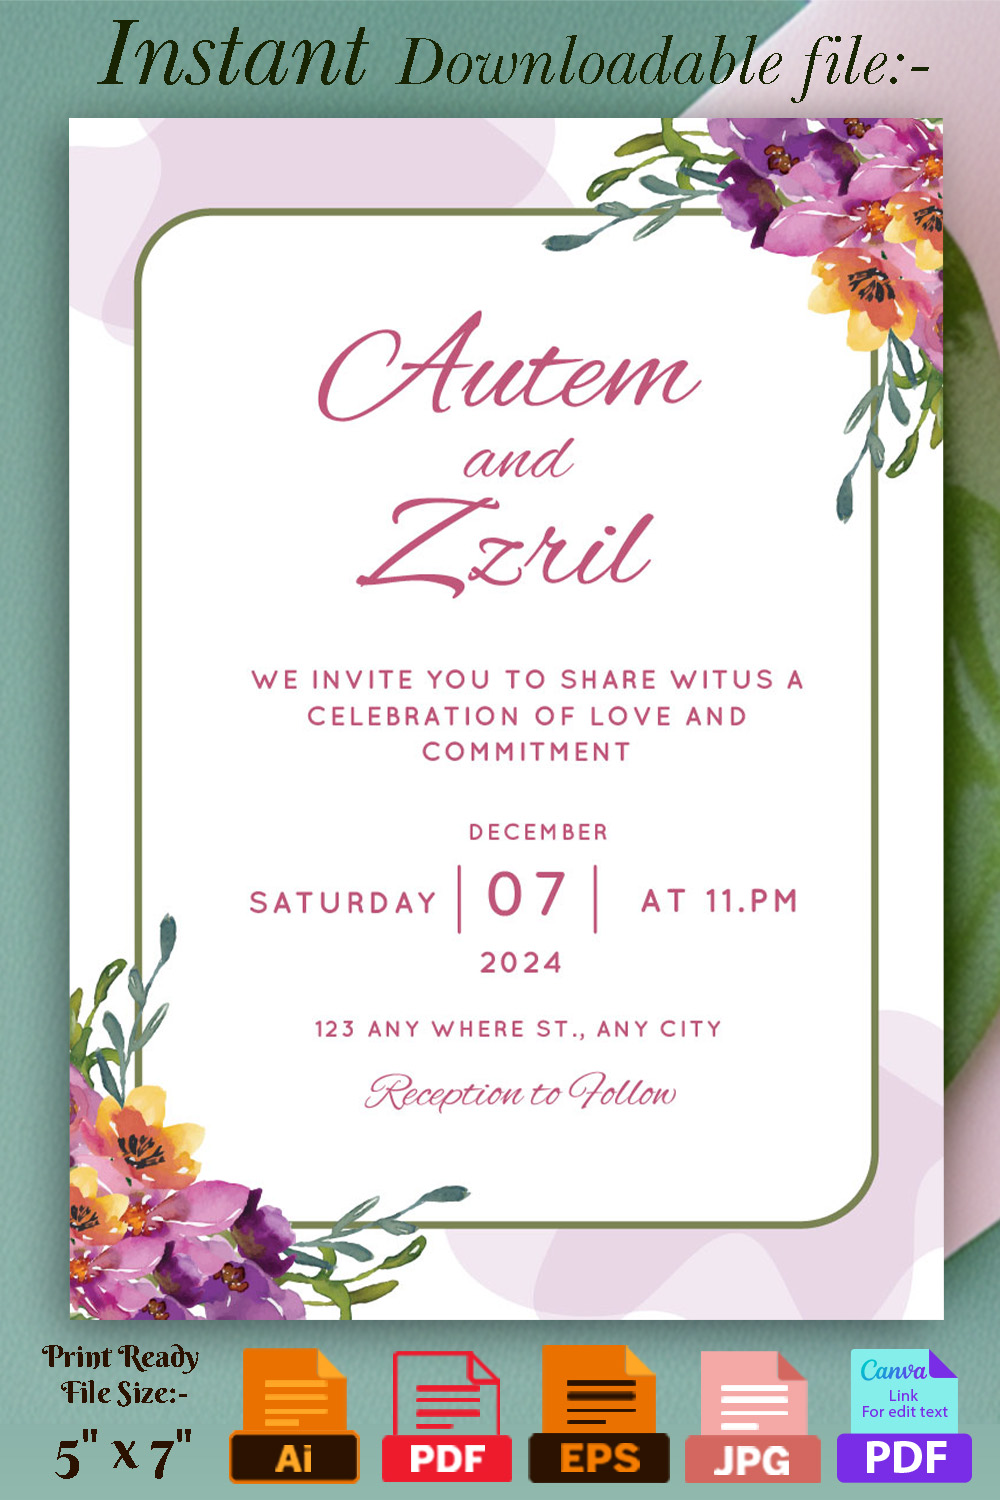 Image of gorgeous wedding invitation with floral design.